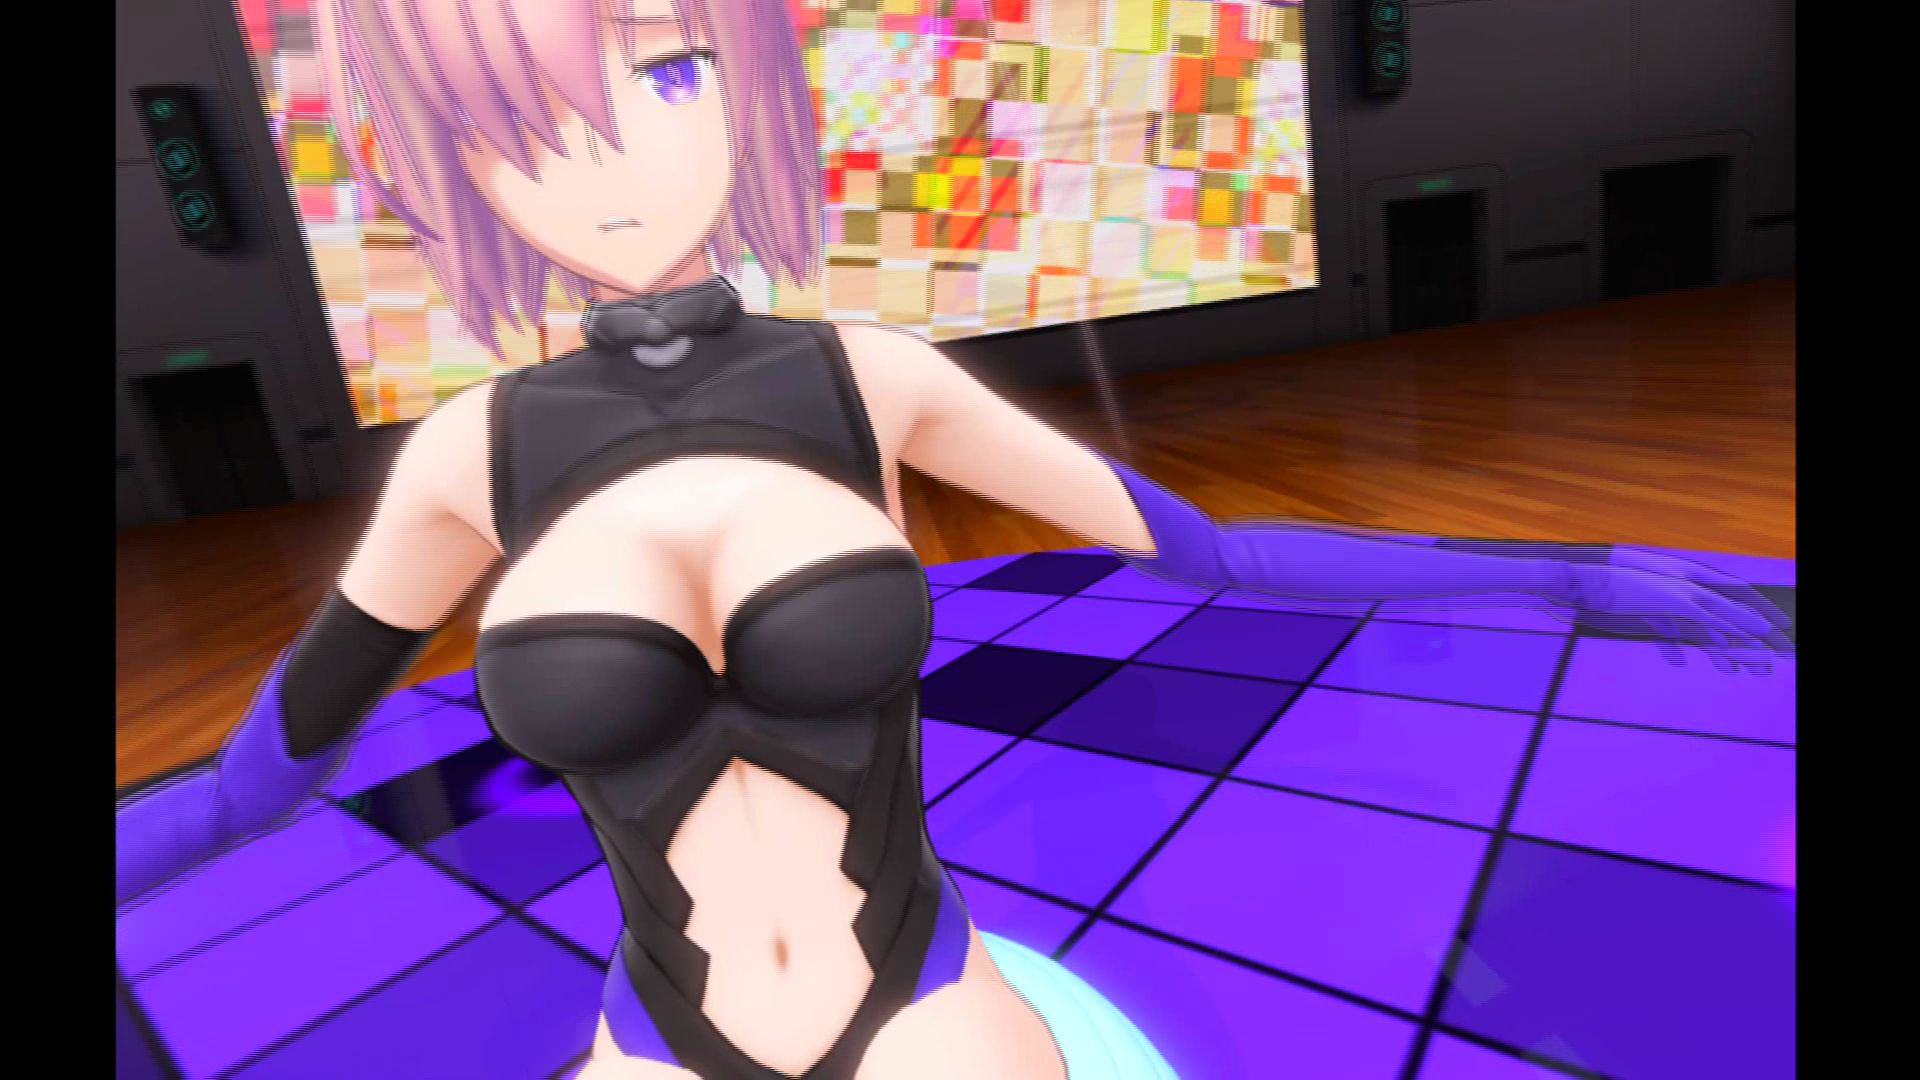 [Fate/Grand order VR] Maschsee underwear and breast! The underwear of the alto rear, too! 16